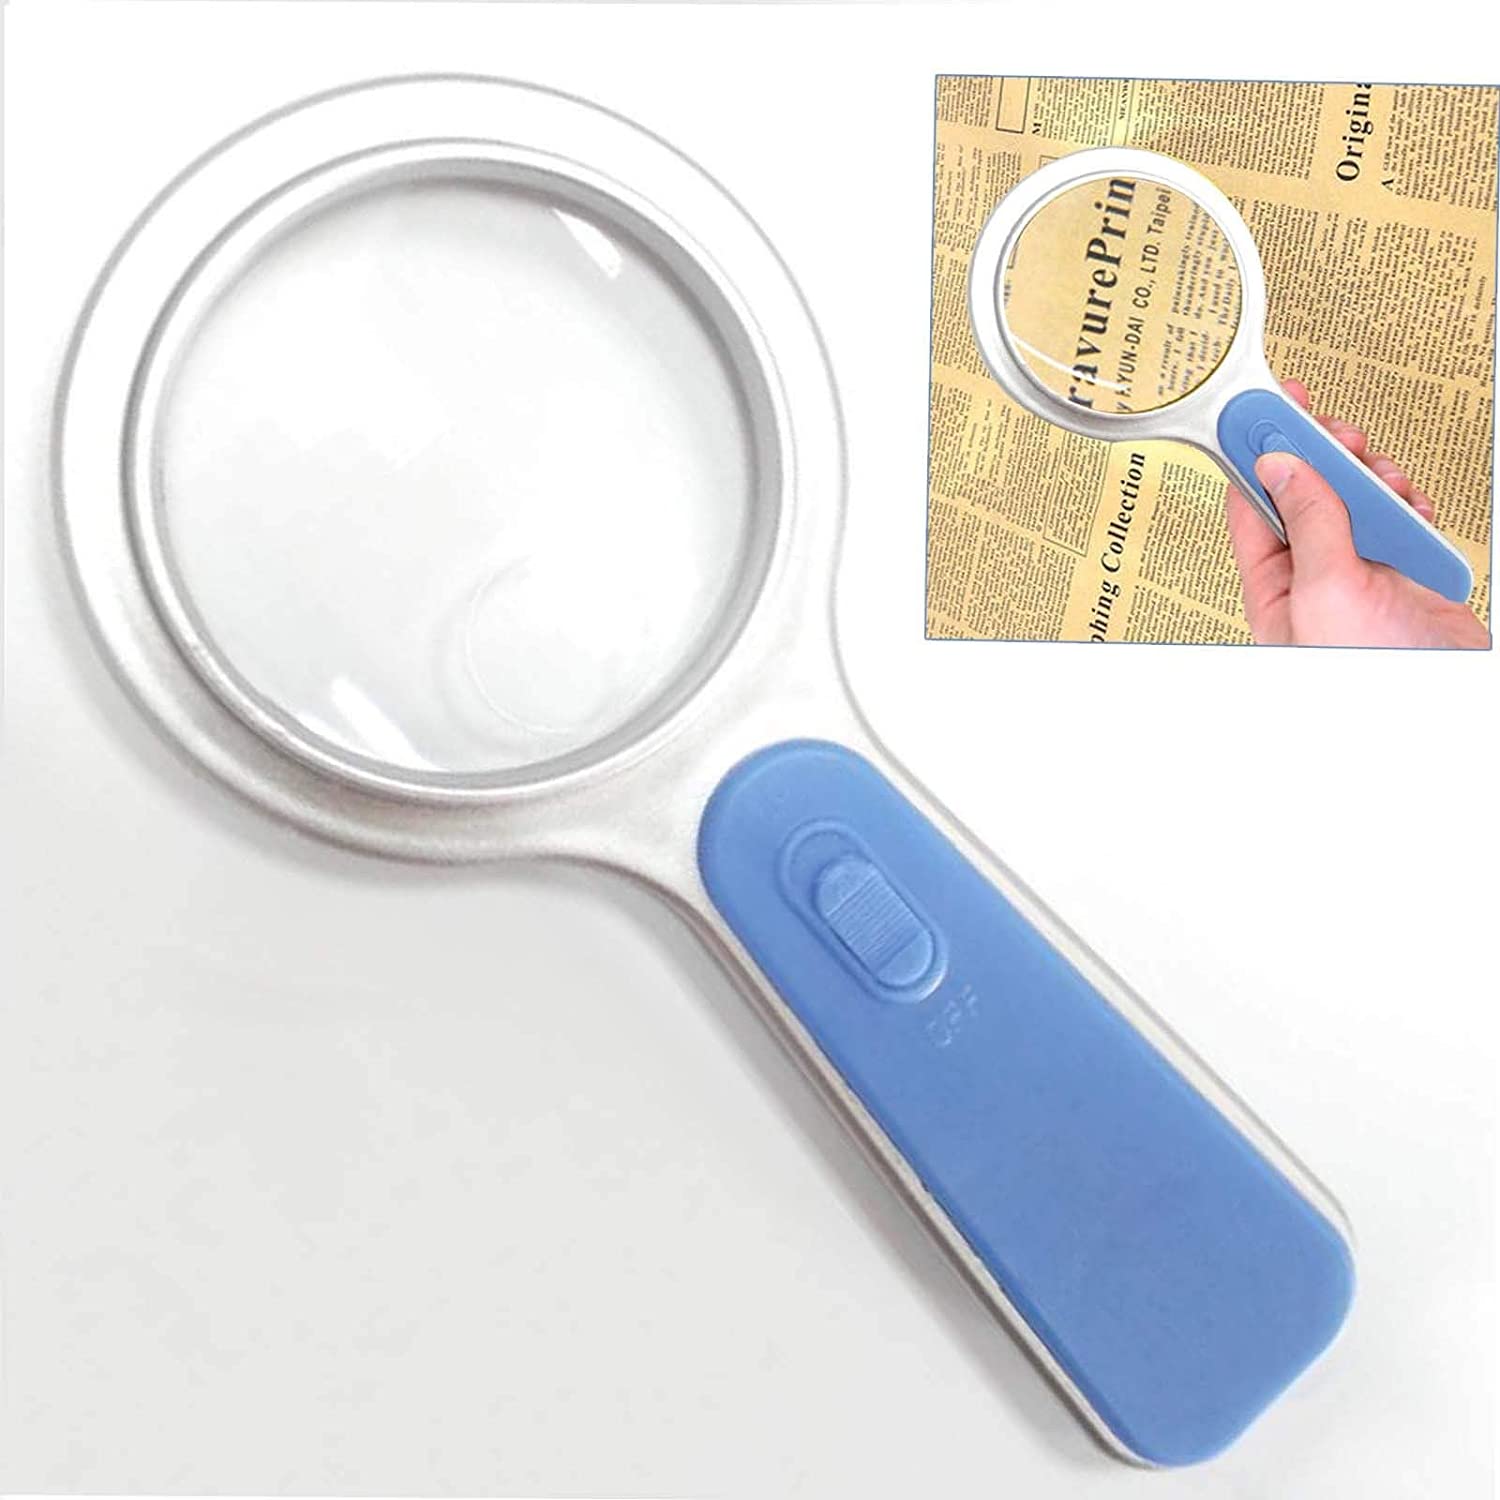 5x Handheld Magnifier Reading Magnifying Glass Jewelry Loupe With LED Light UKED